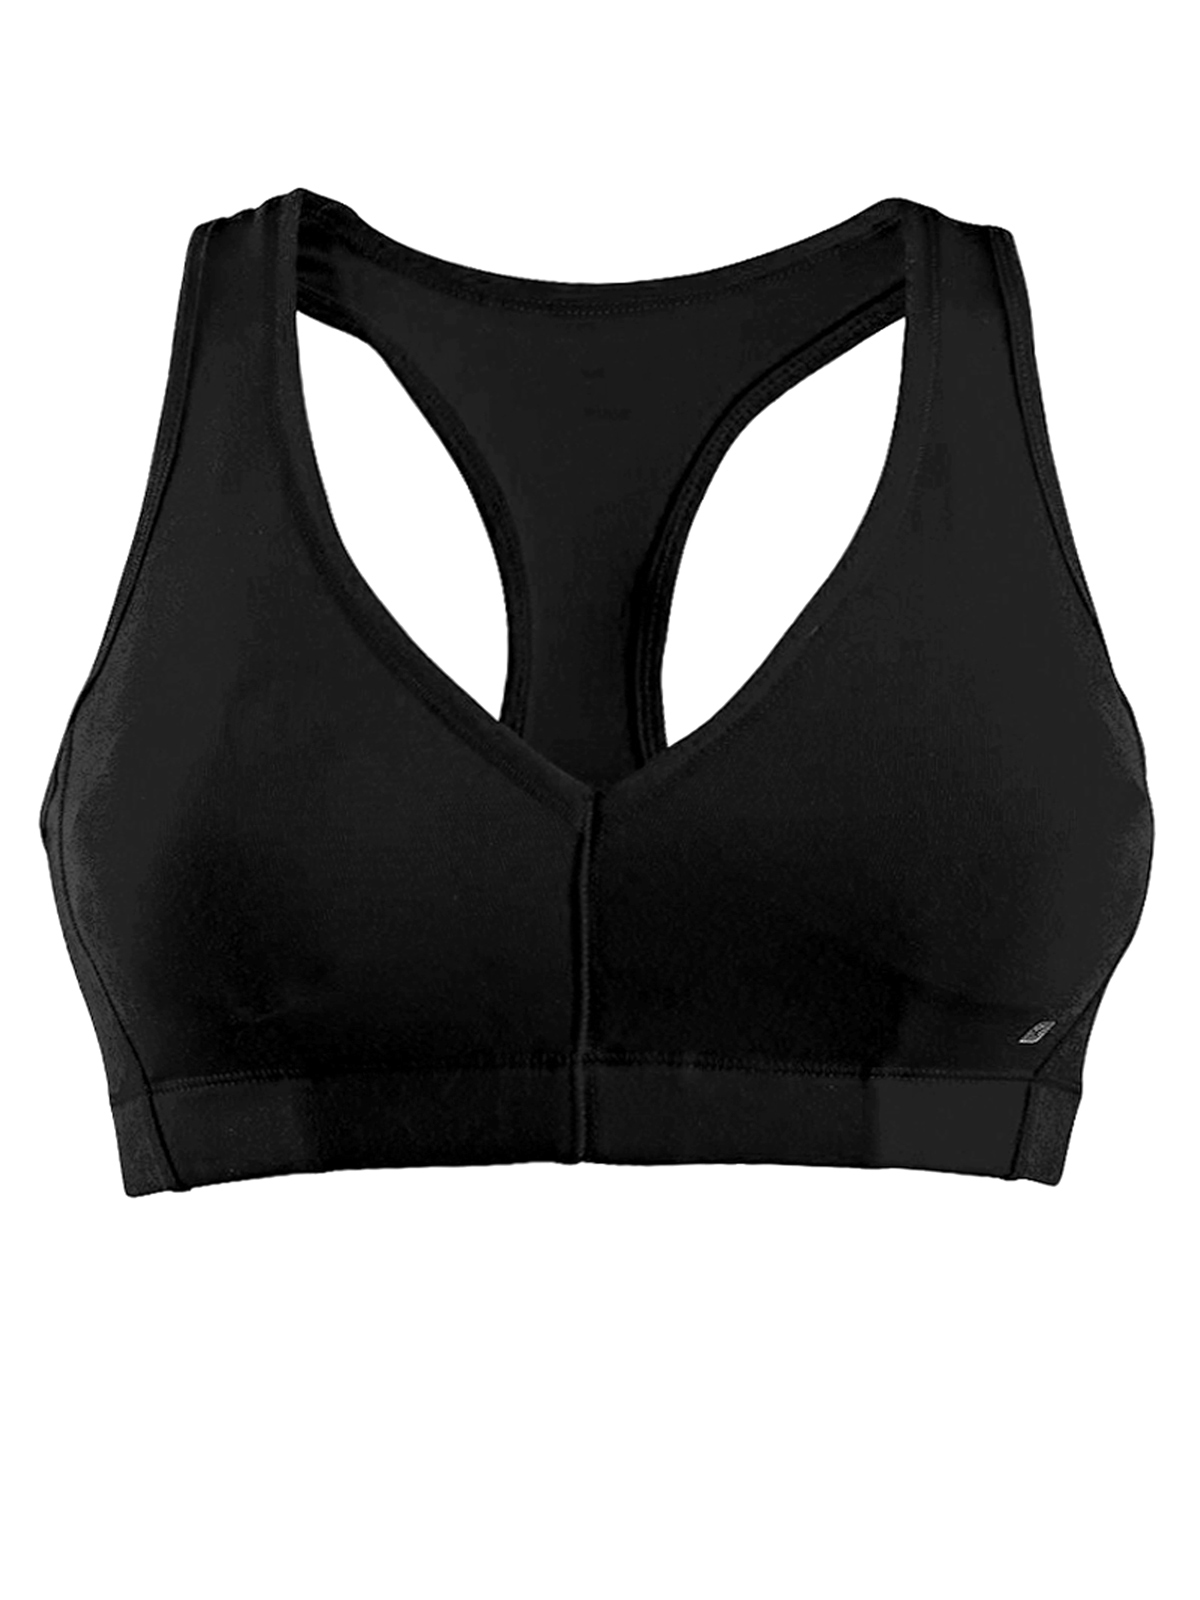 Buy Domyos by Decathlon Women Black Low Support Padded Sports Bra at